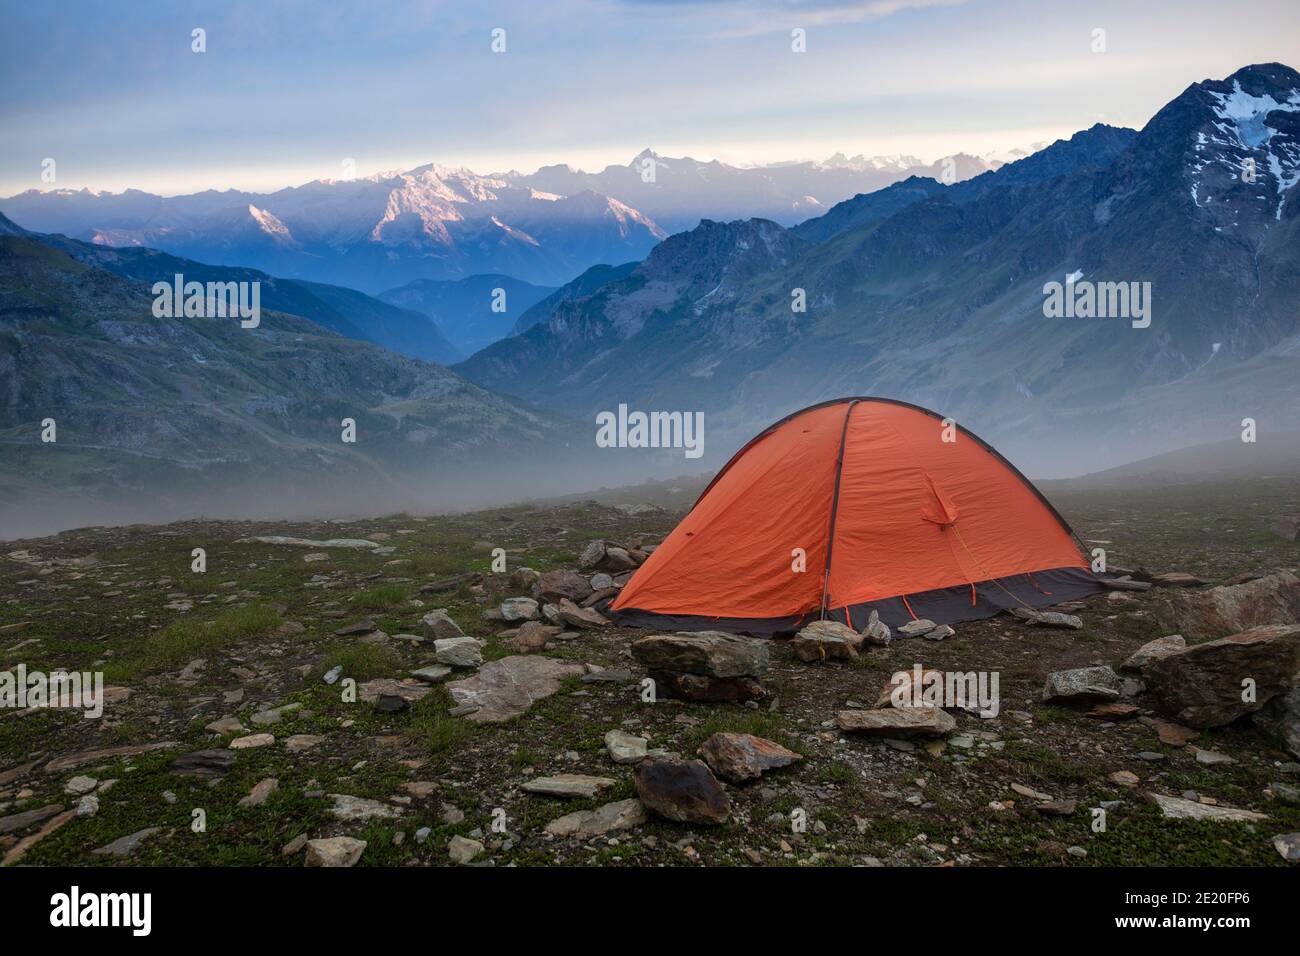 Base camp set in Alpine background. Ten set on hill i Alps mountains. Tourist shelter camp in high mountains. Stock Photo